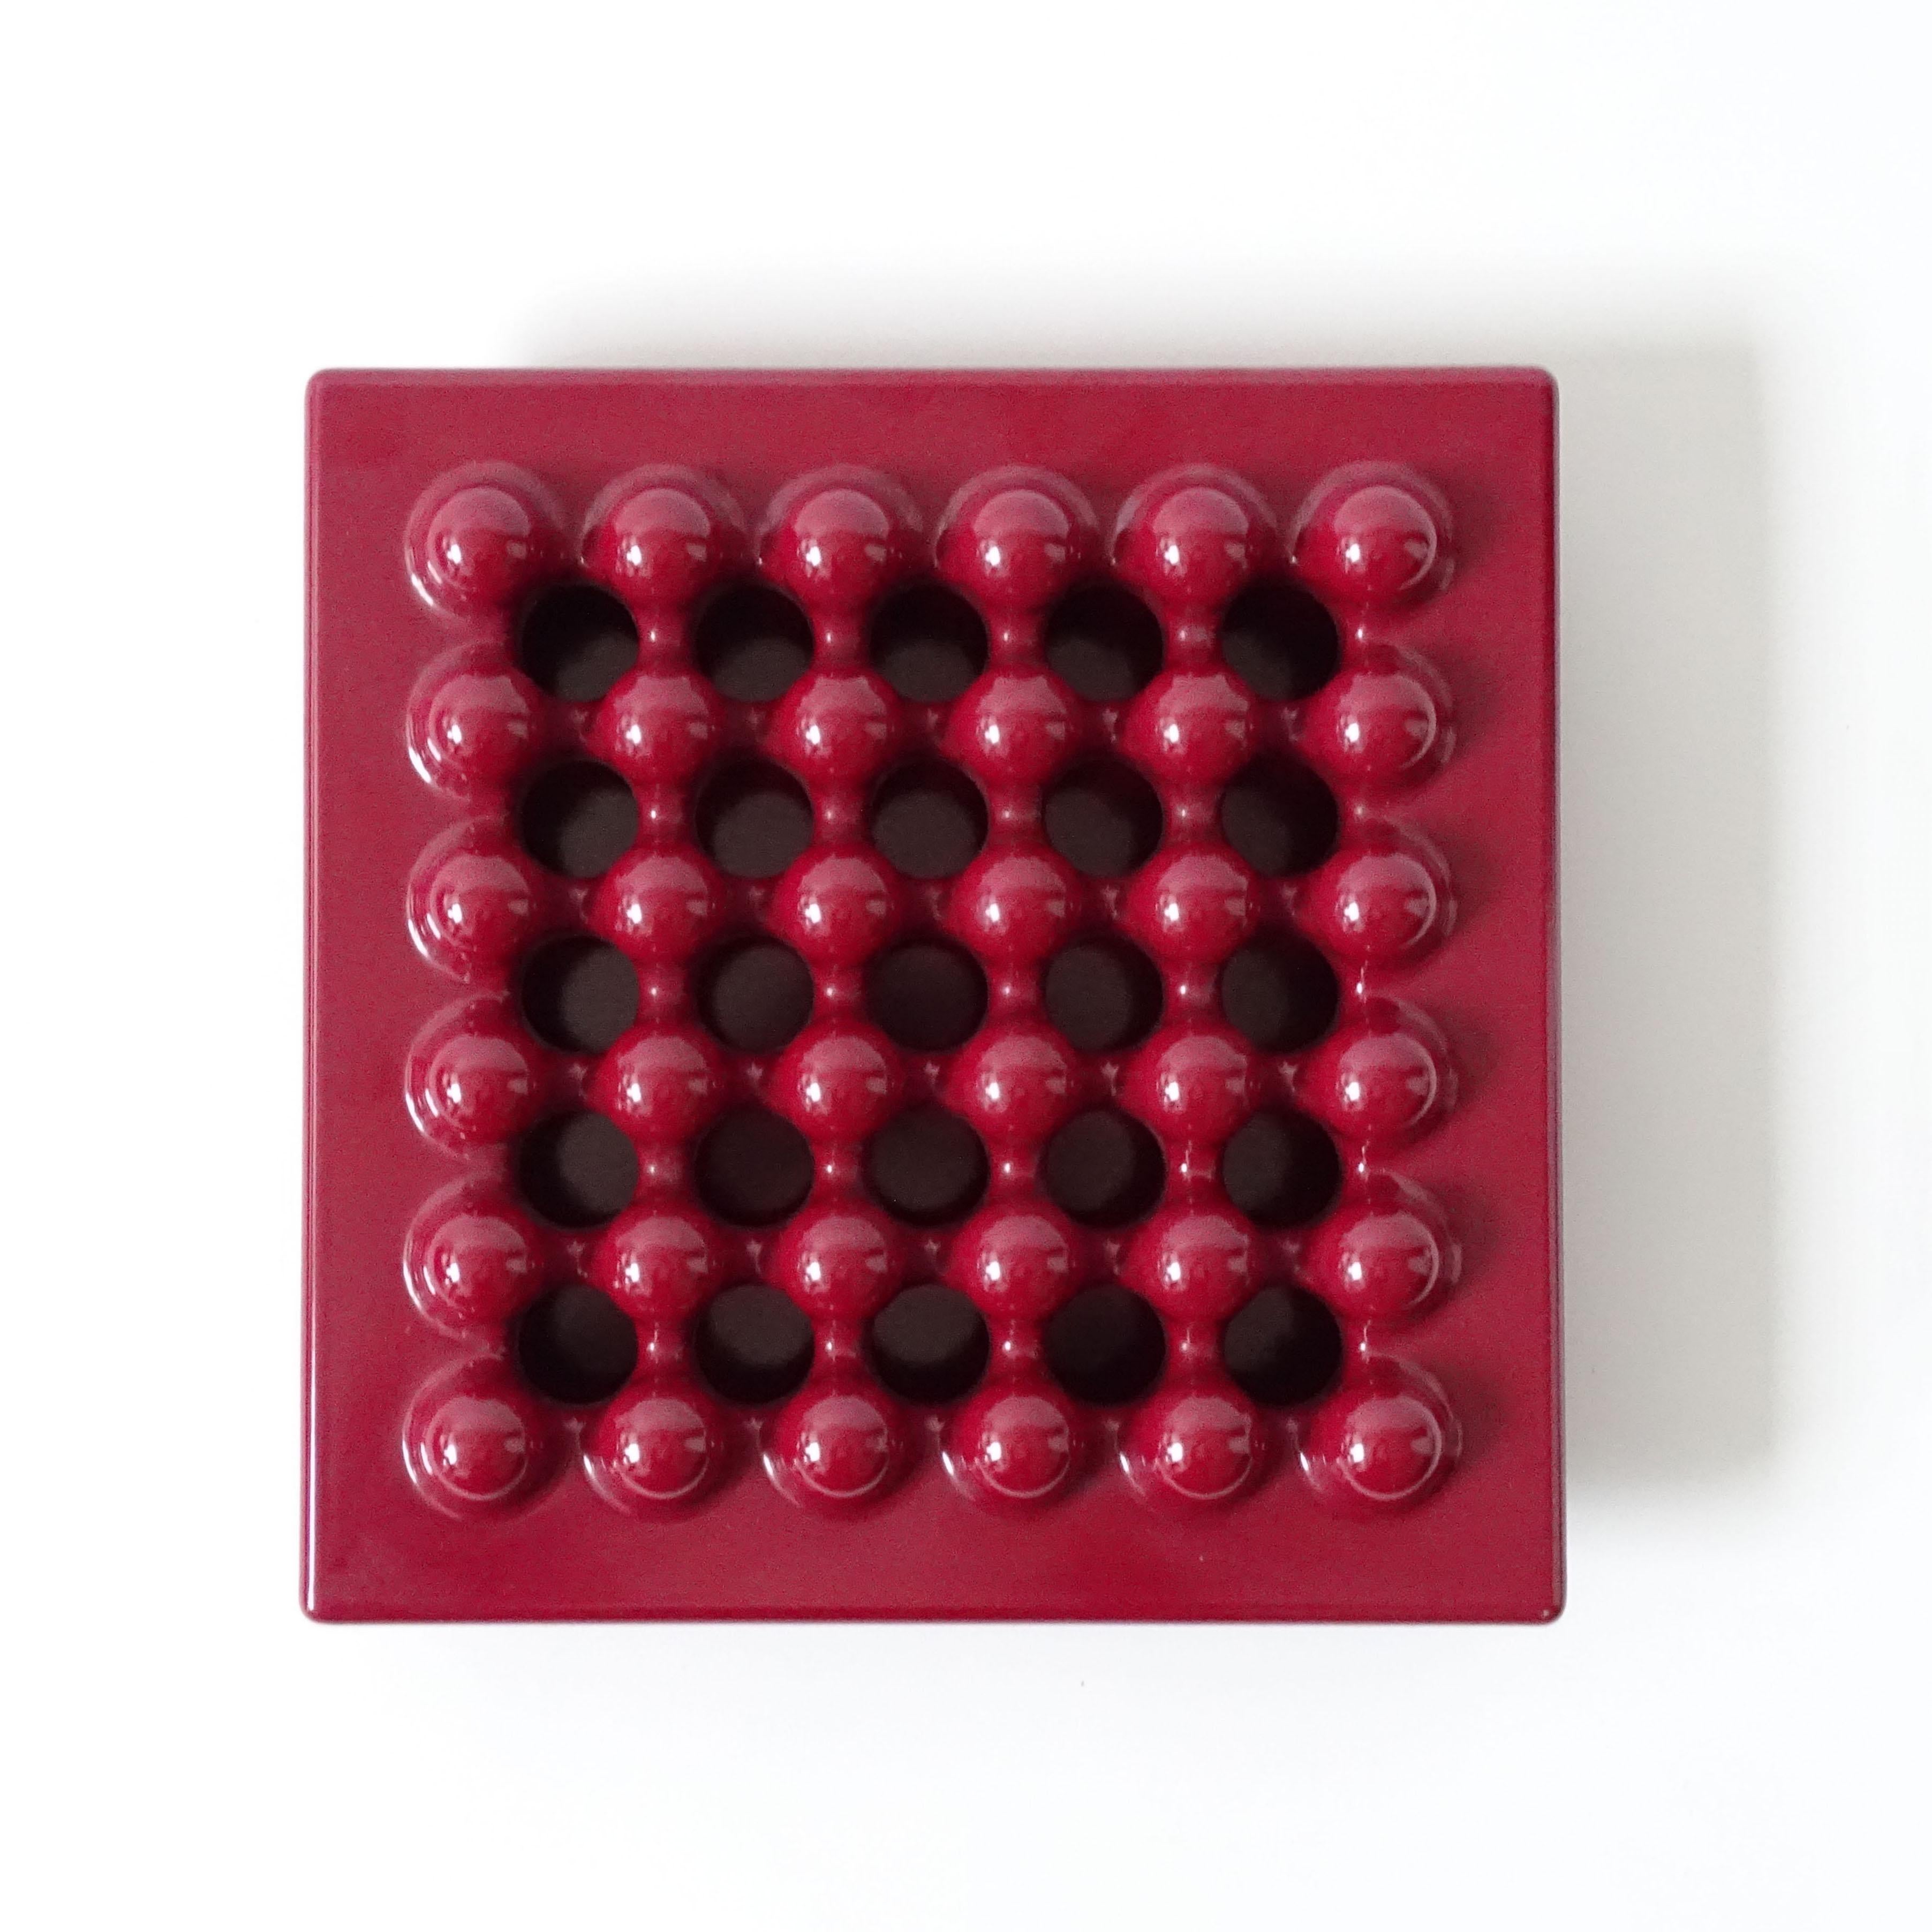 Ettore Sottsass Cendrier Olivetti Synthesis rouge foncé, vers 1970